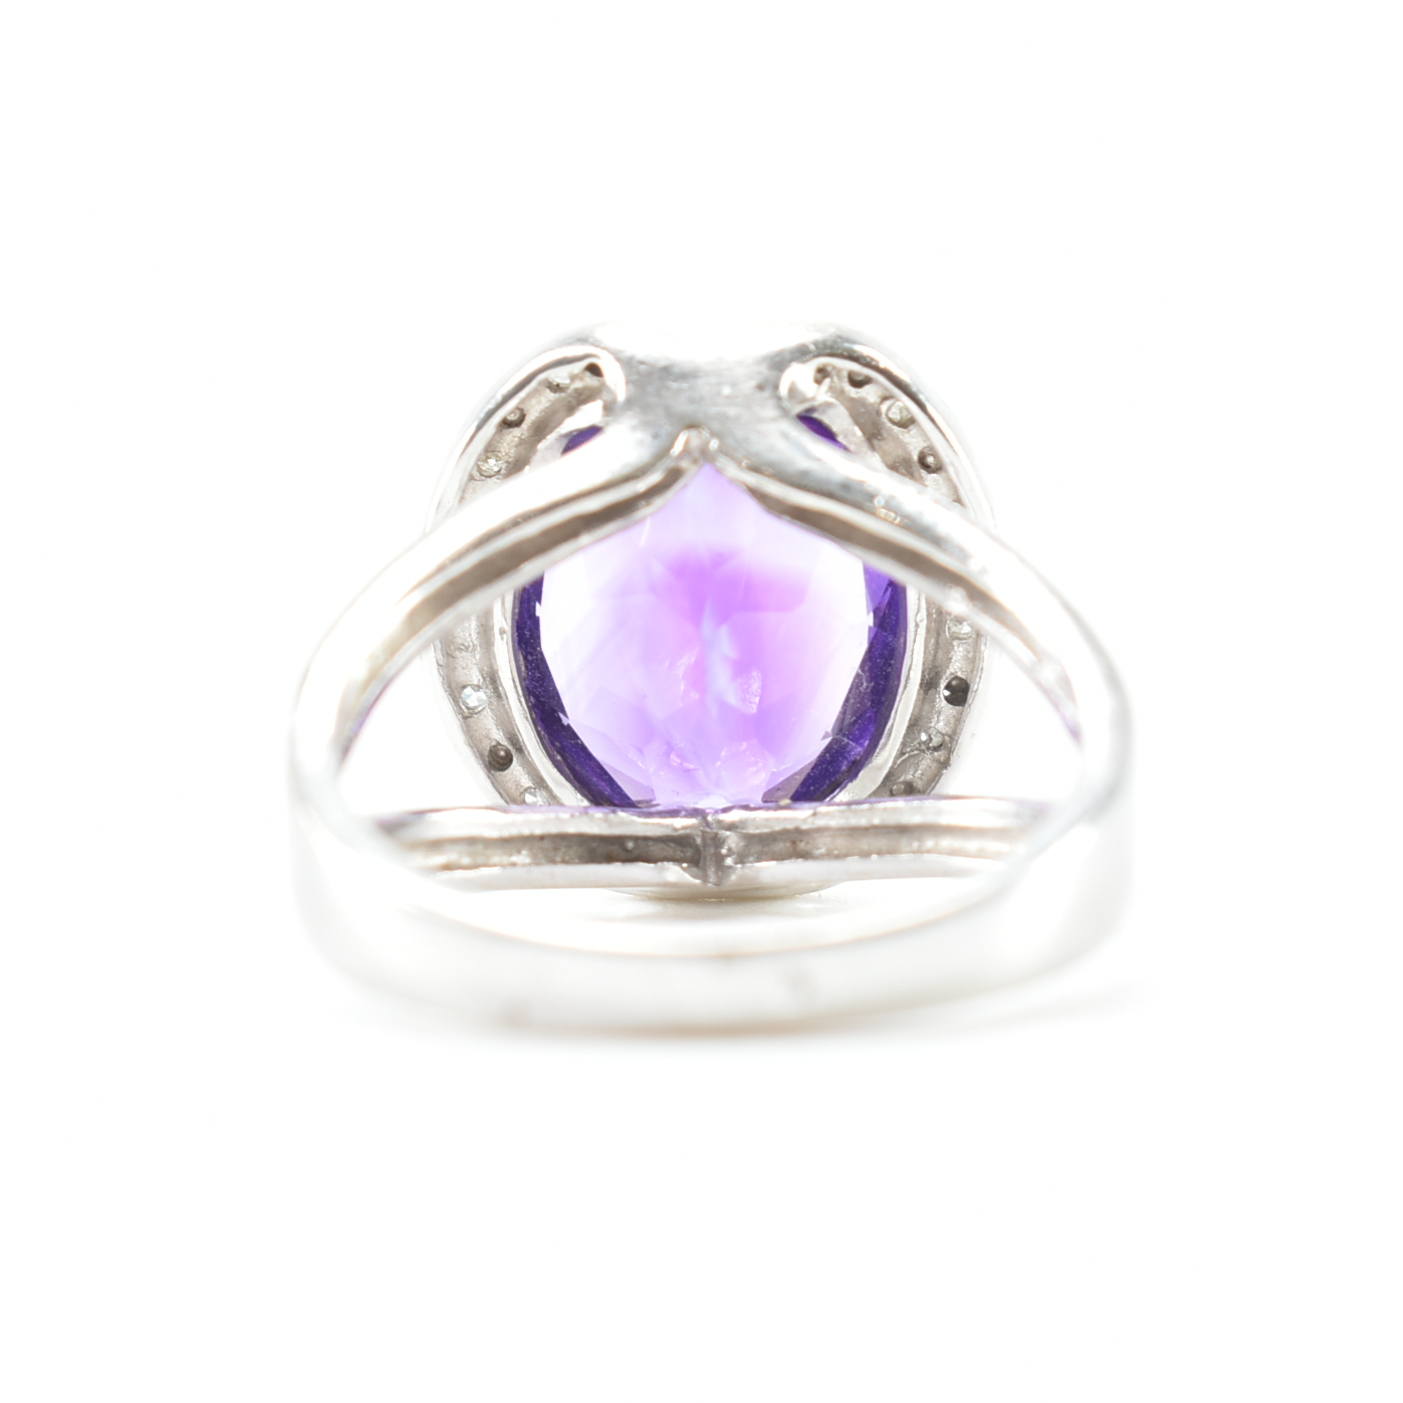 FRENCH 18CT WHITE GOLD AMETHYST & DIAMOND COCKTAIL RING - Image 4 of 9